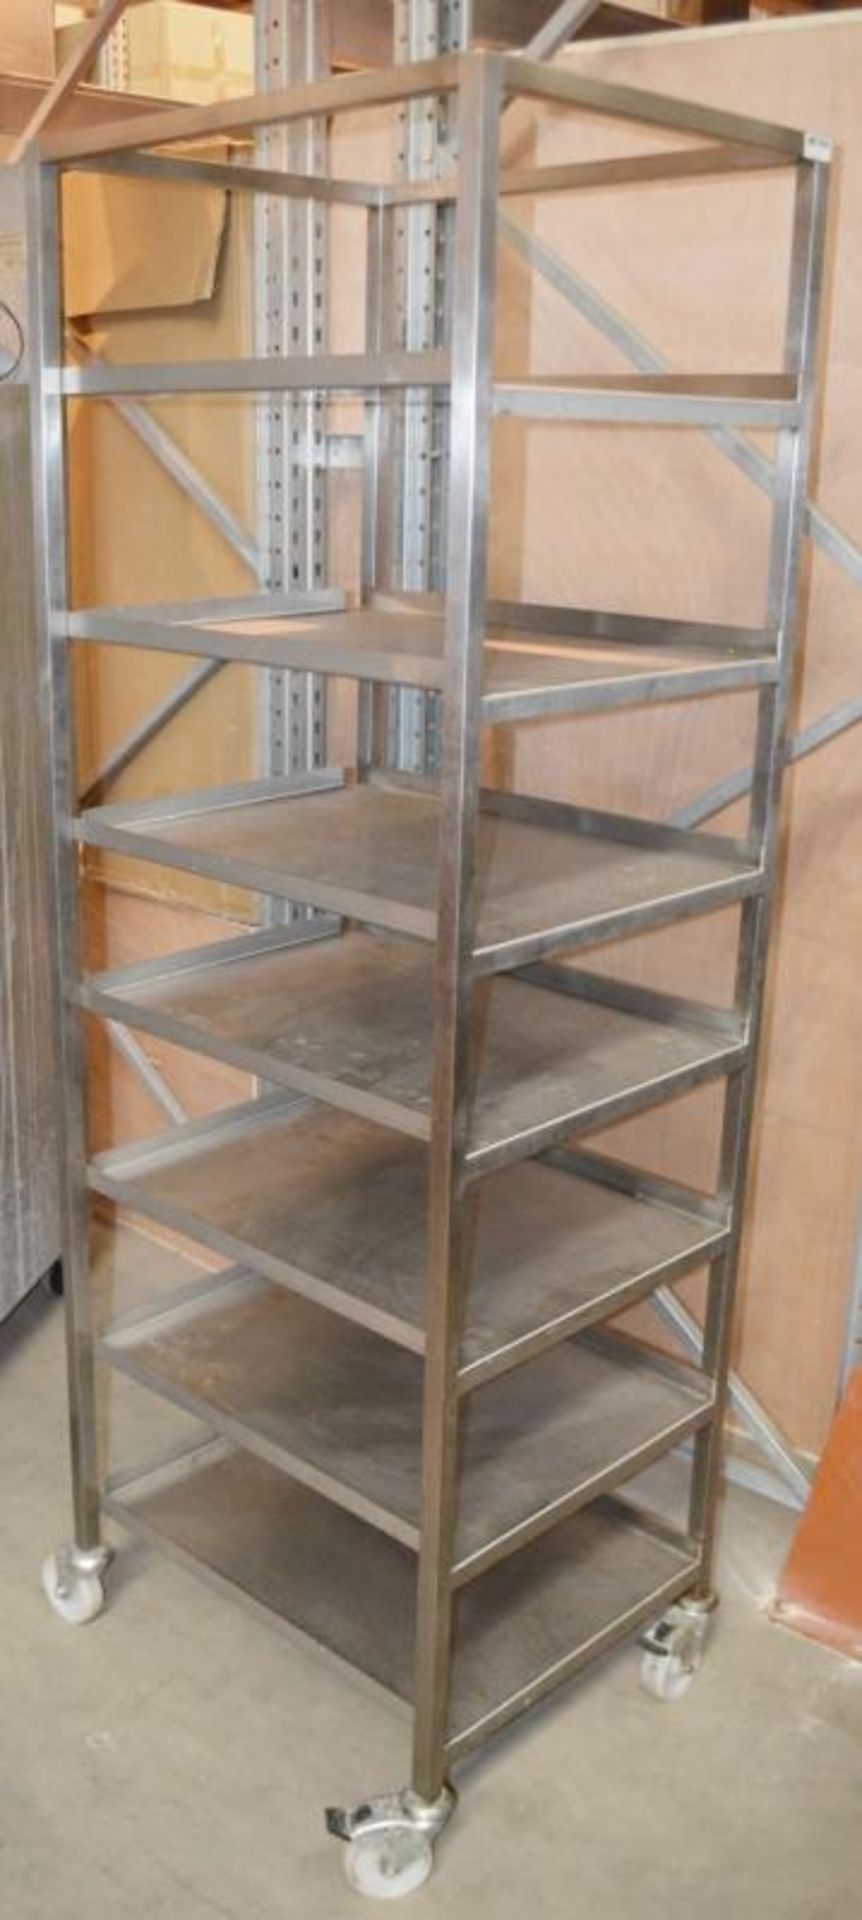 1 x Stainless Steel Commercial Kitchen 7-Teir Trolley On Castors - Dimensions: H185 x W54 x D64cm - - Image 2 of 4